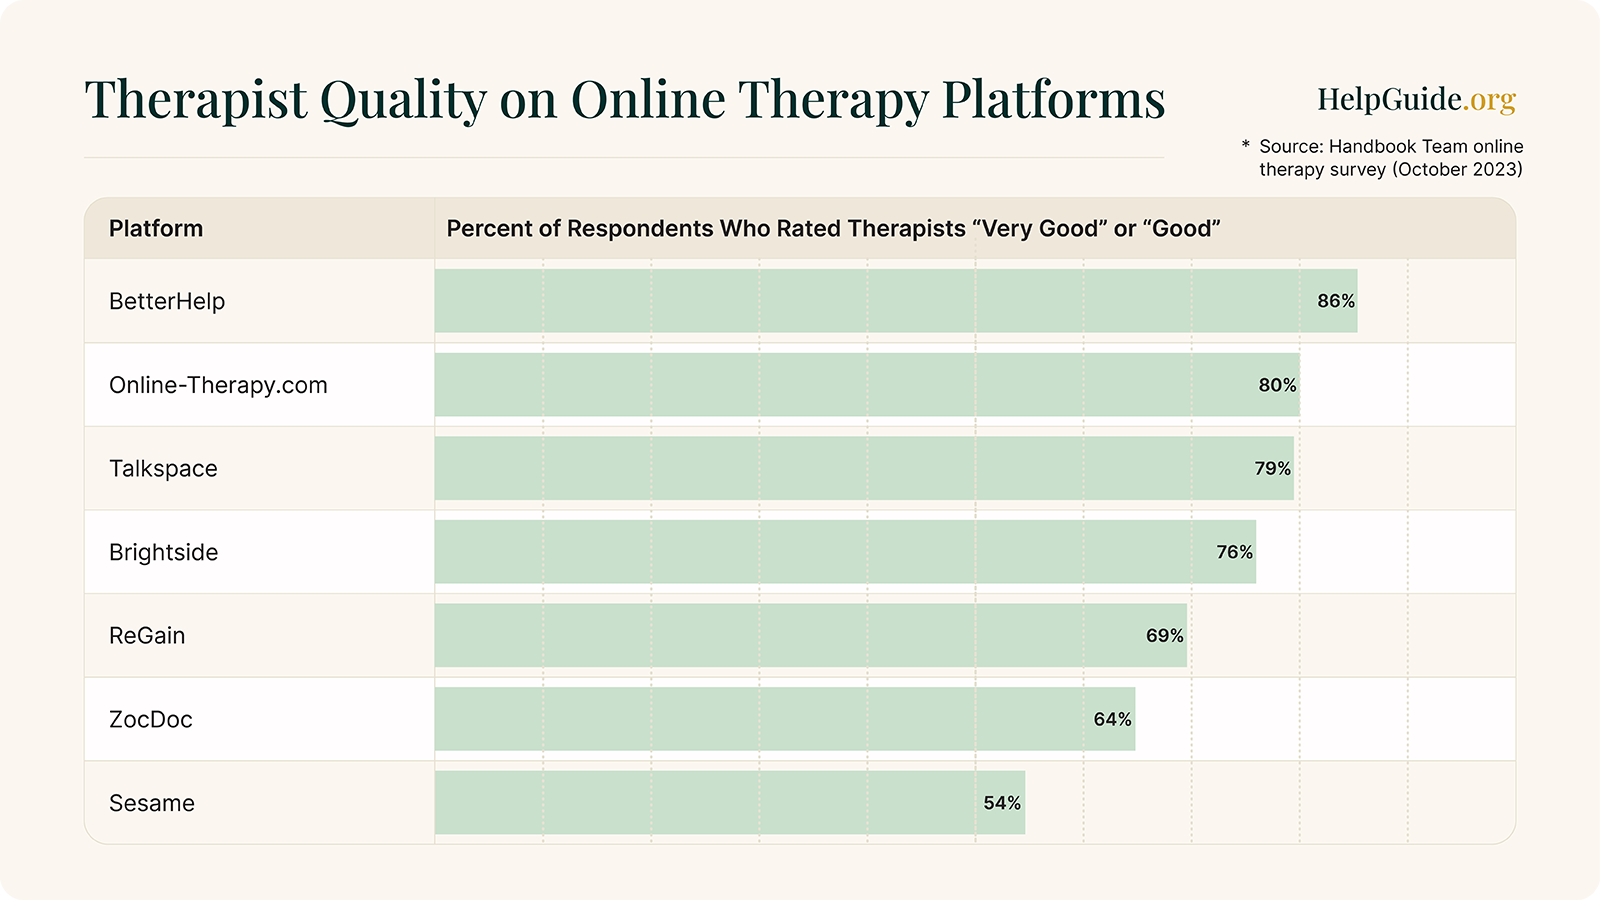 therapist quality on online therapy platforms according to Handbook Team october 2023 survey